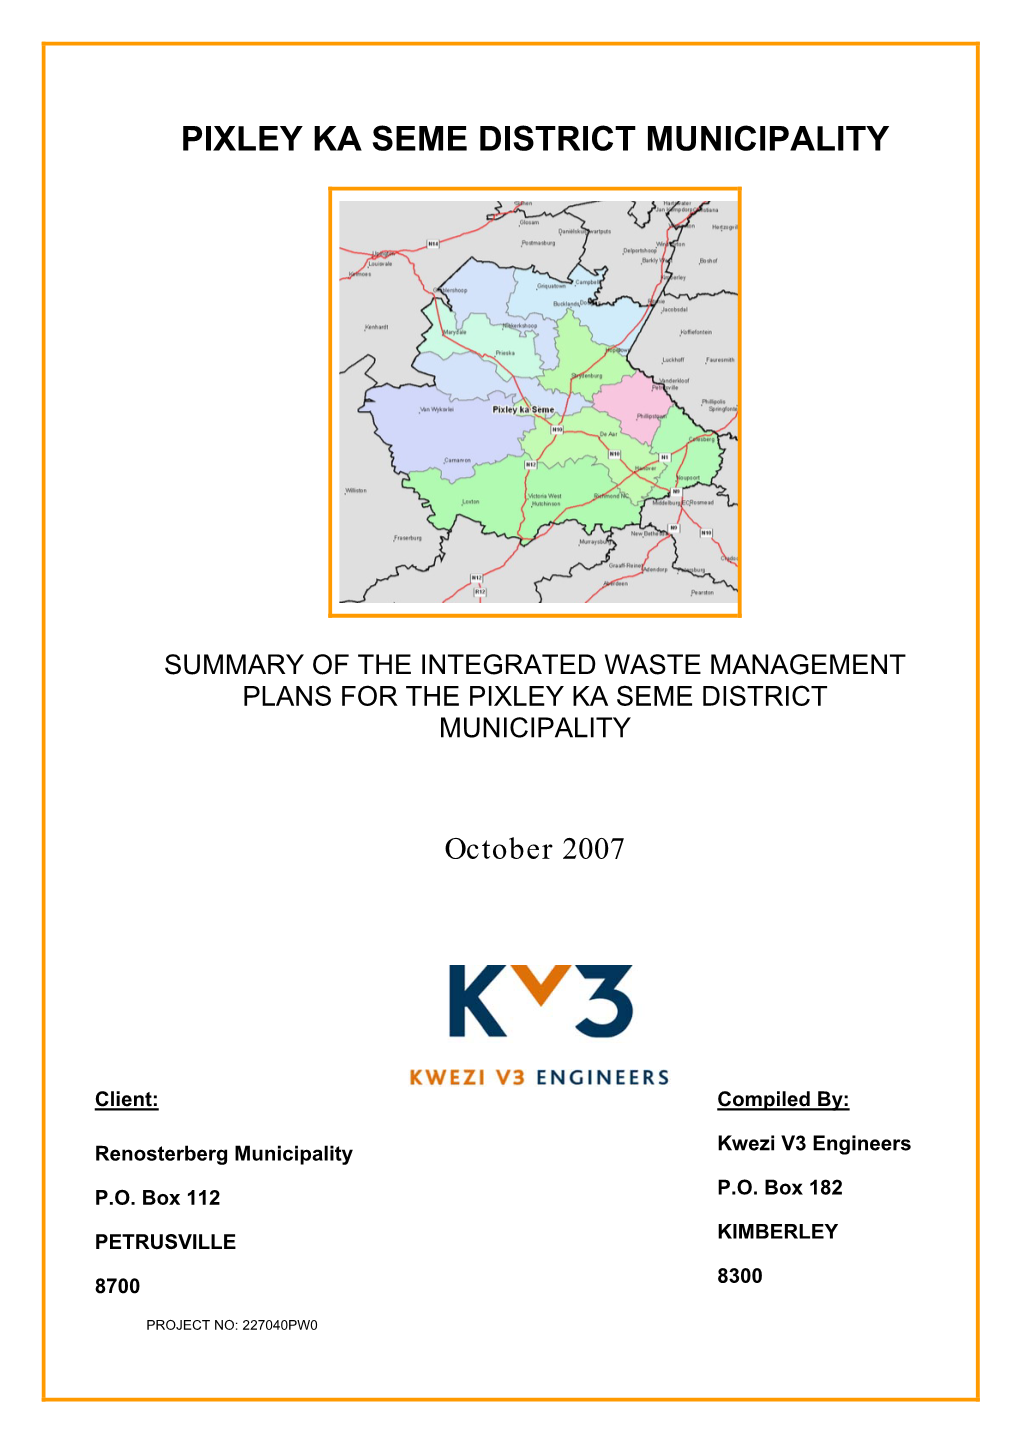 Integrated Waste Management Plans for the Pixley Ka Seme District Municipality